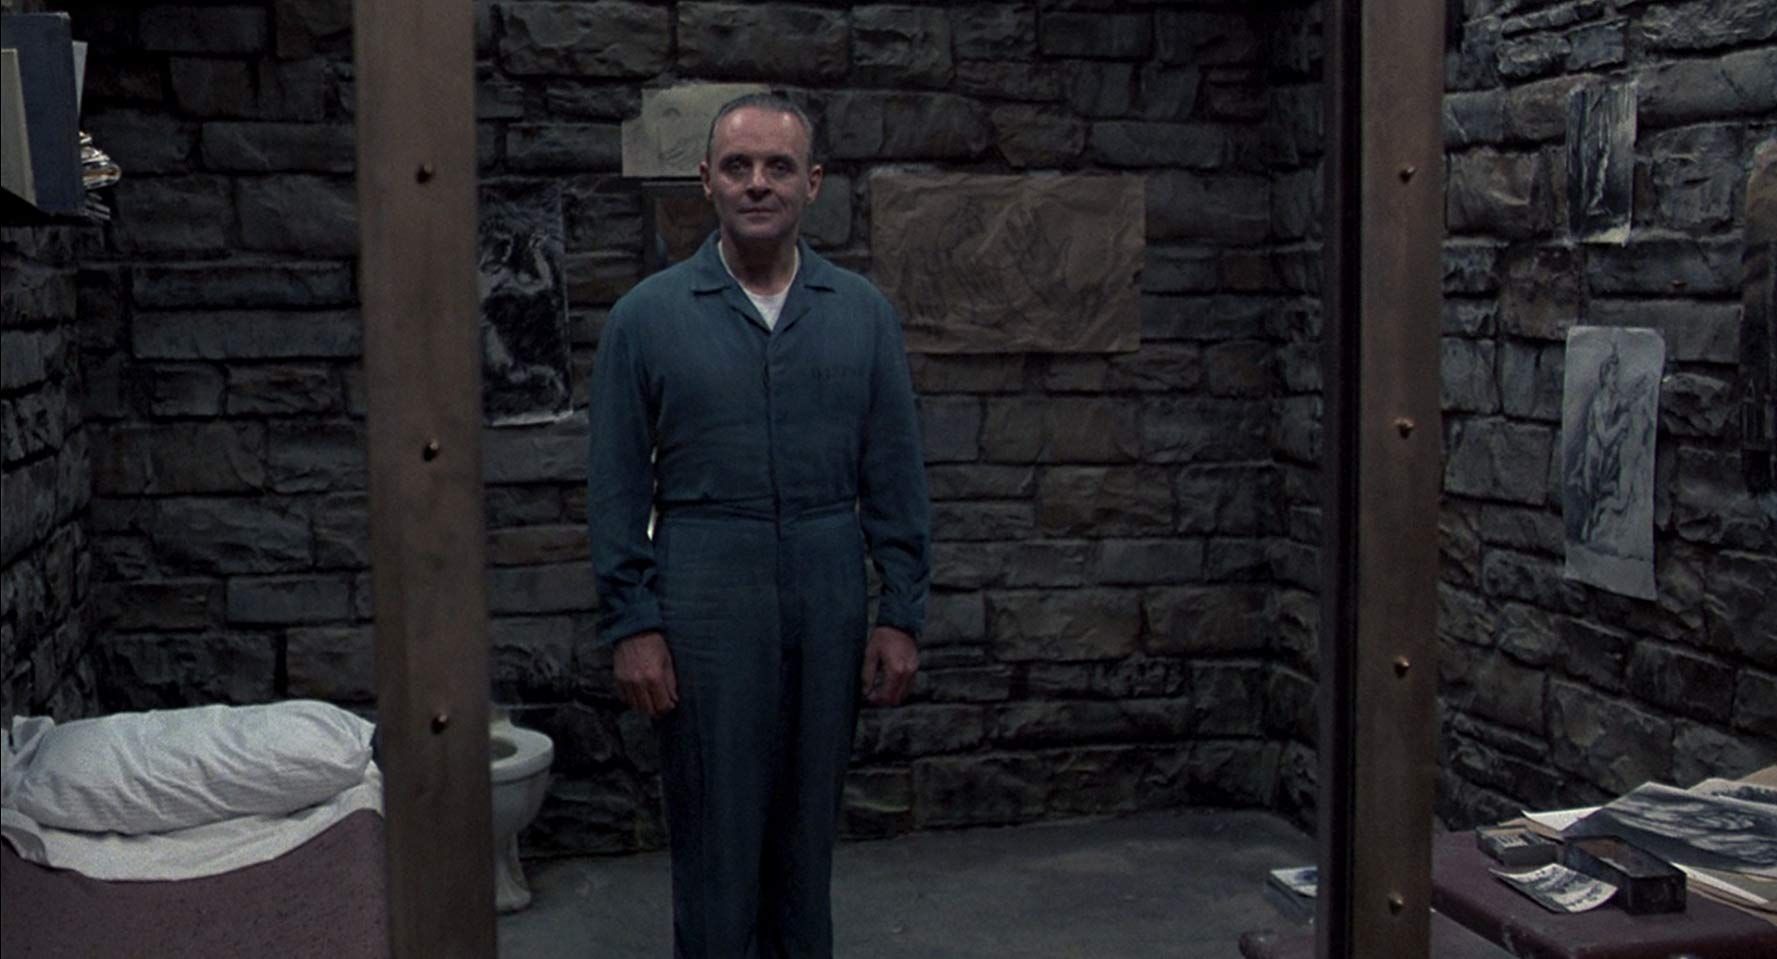 Watch 'Silence of The Lambs' starring Willem Dafoe and Gillian An...